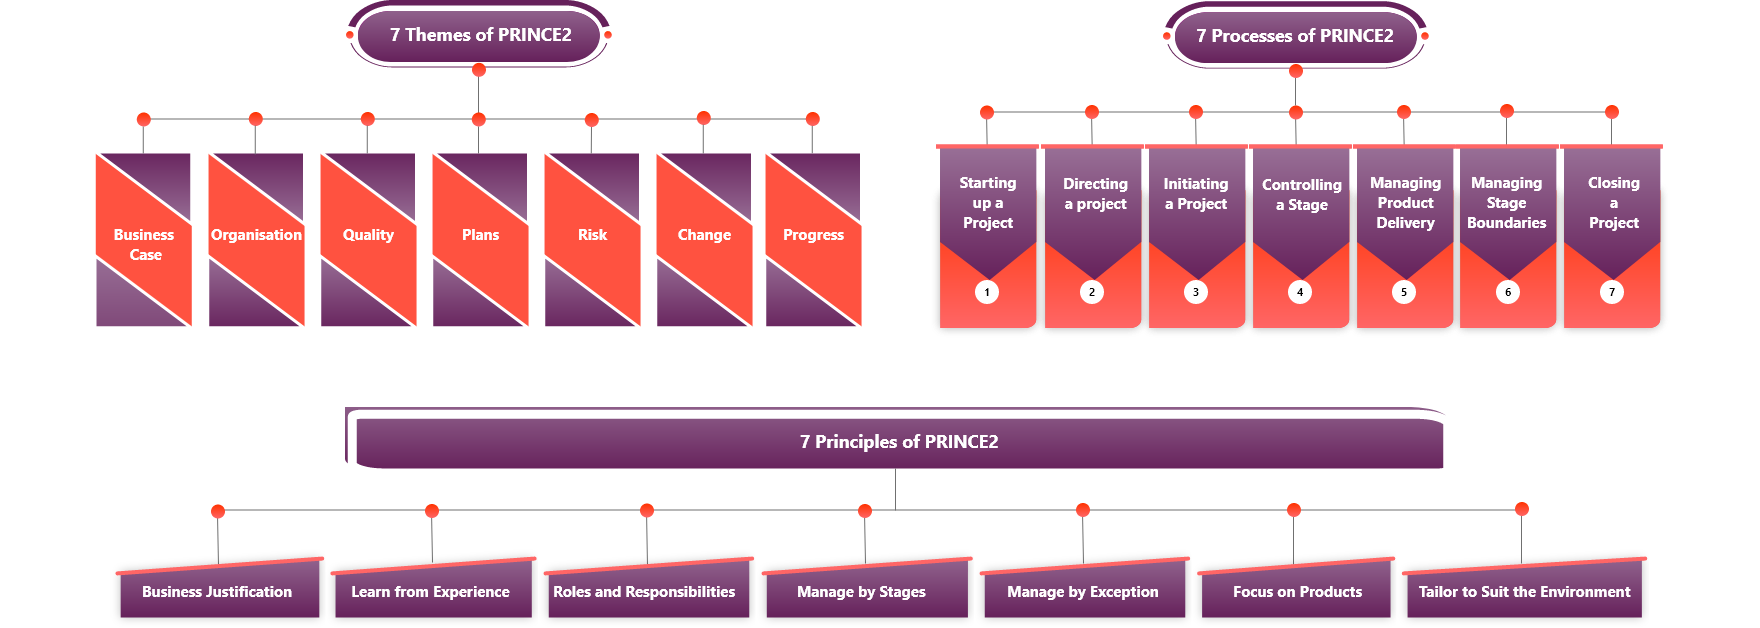 PRINCE2 Methodology Structure